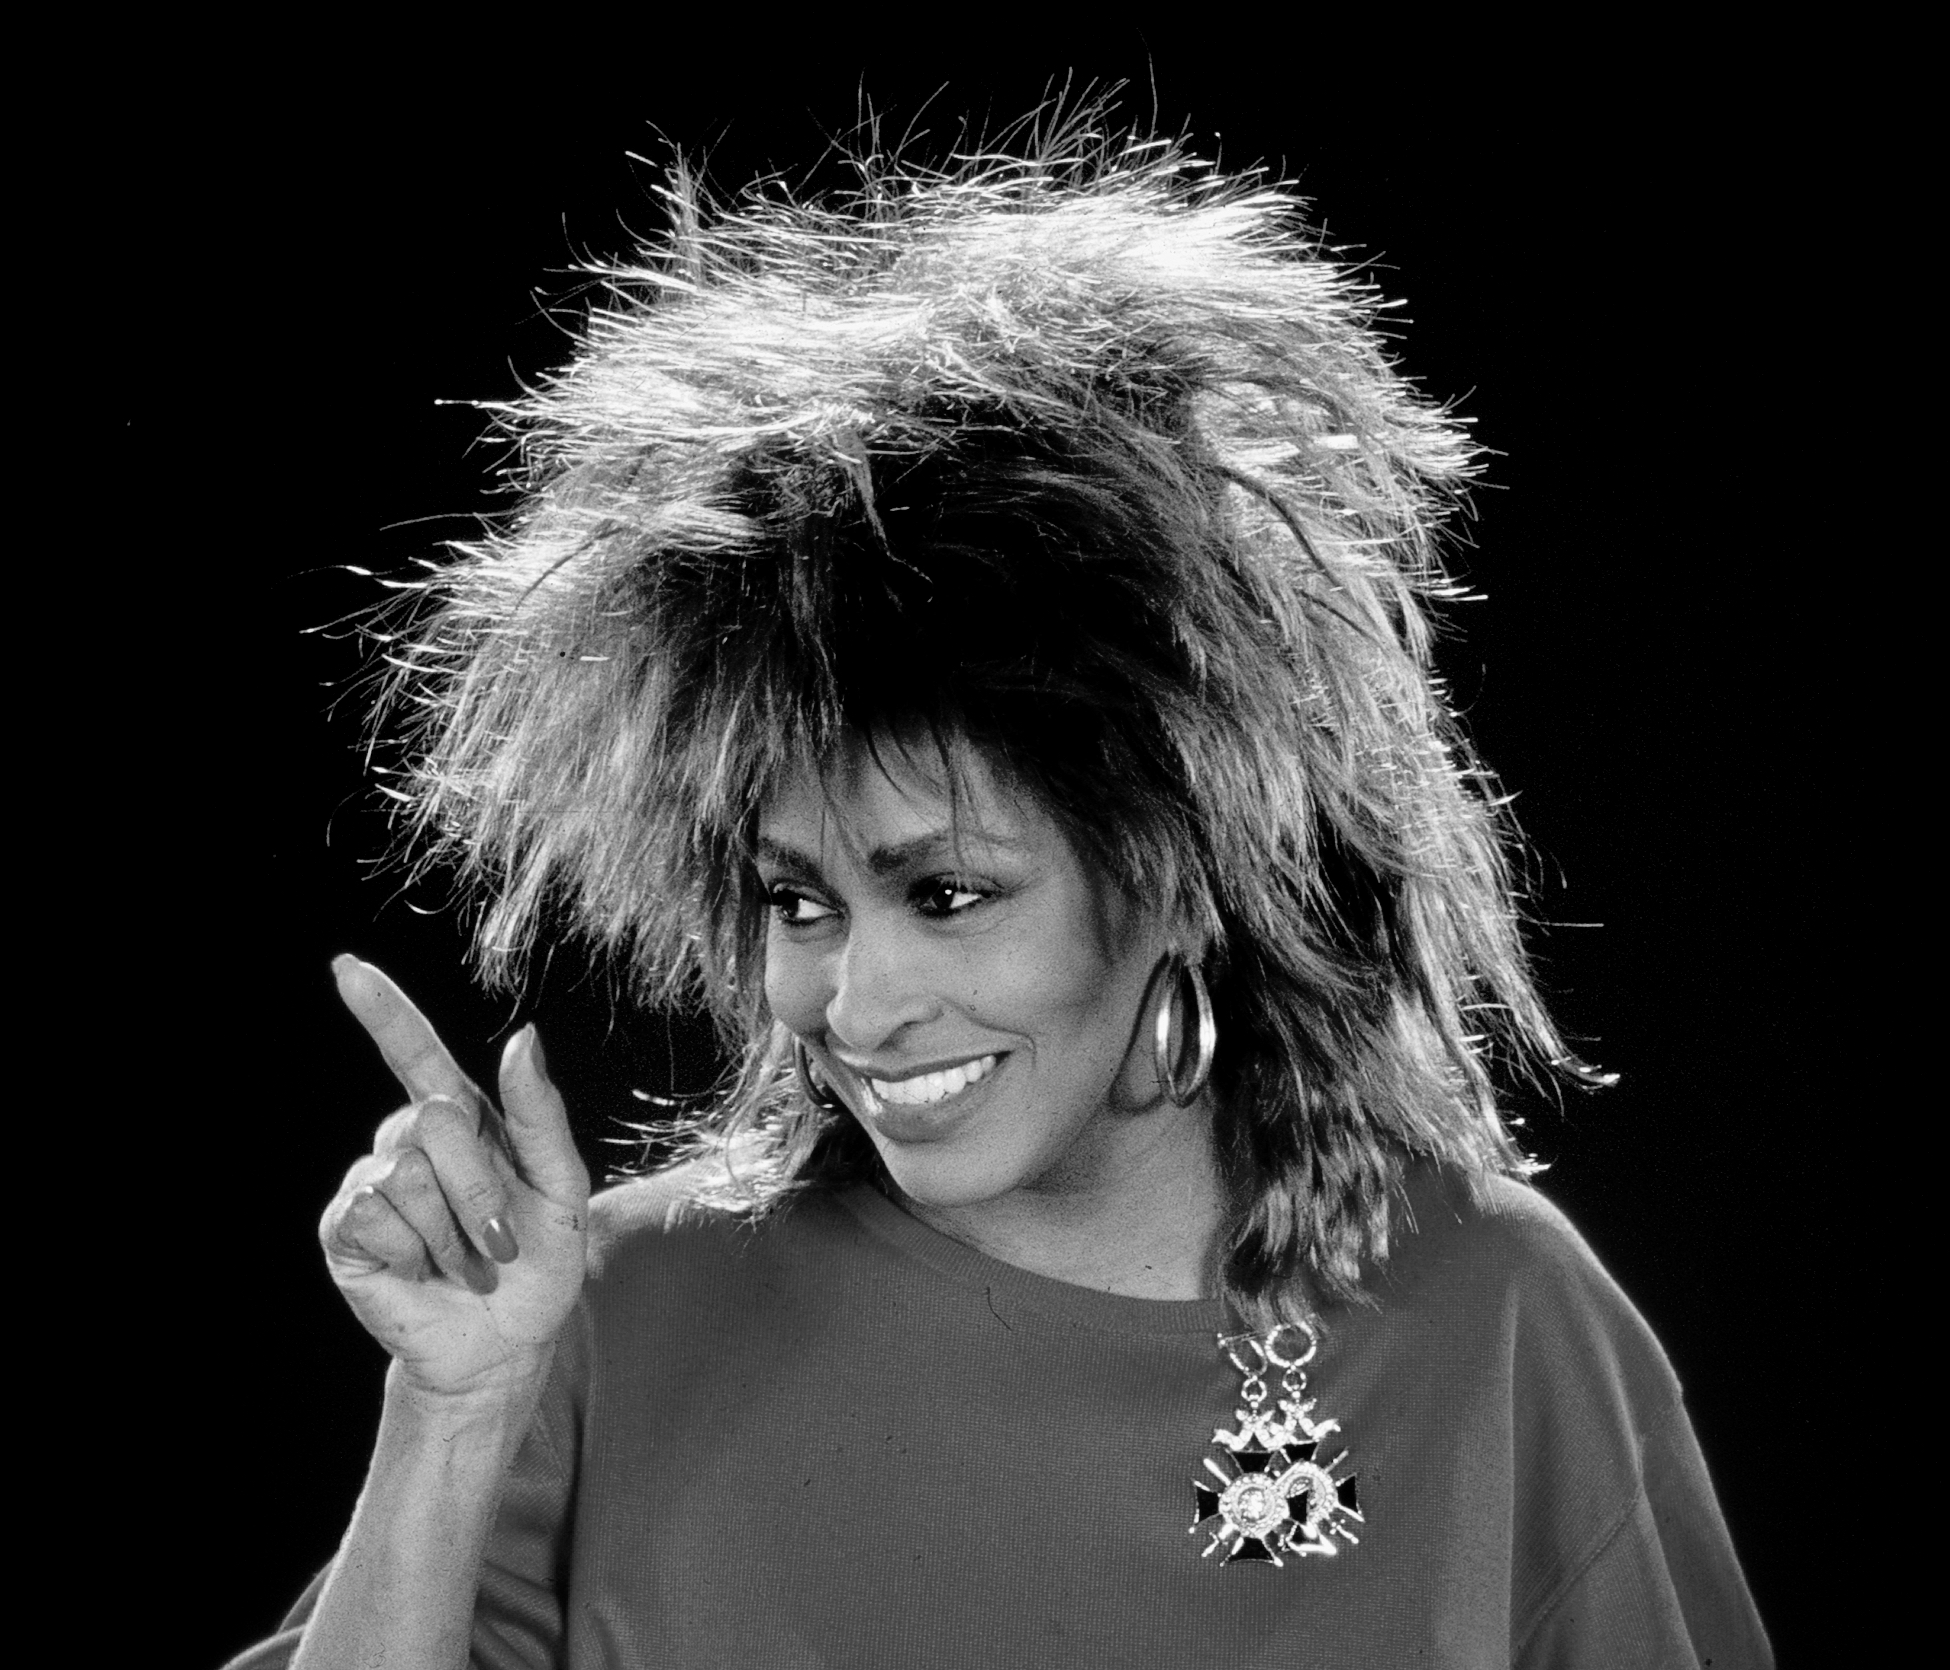 Tina Turner is photographed at Holborn Studios on May 16, 1986, in London | Source: Getty Images